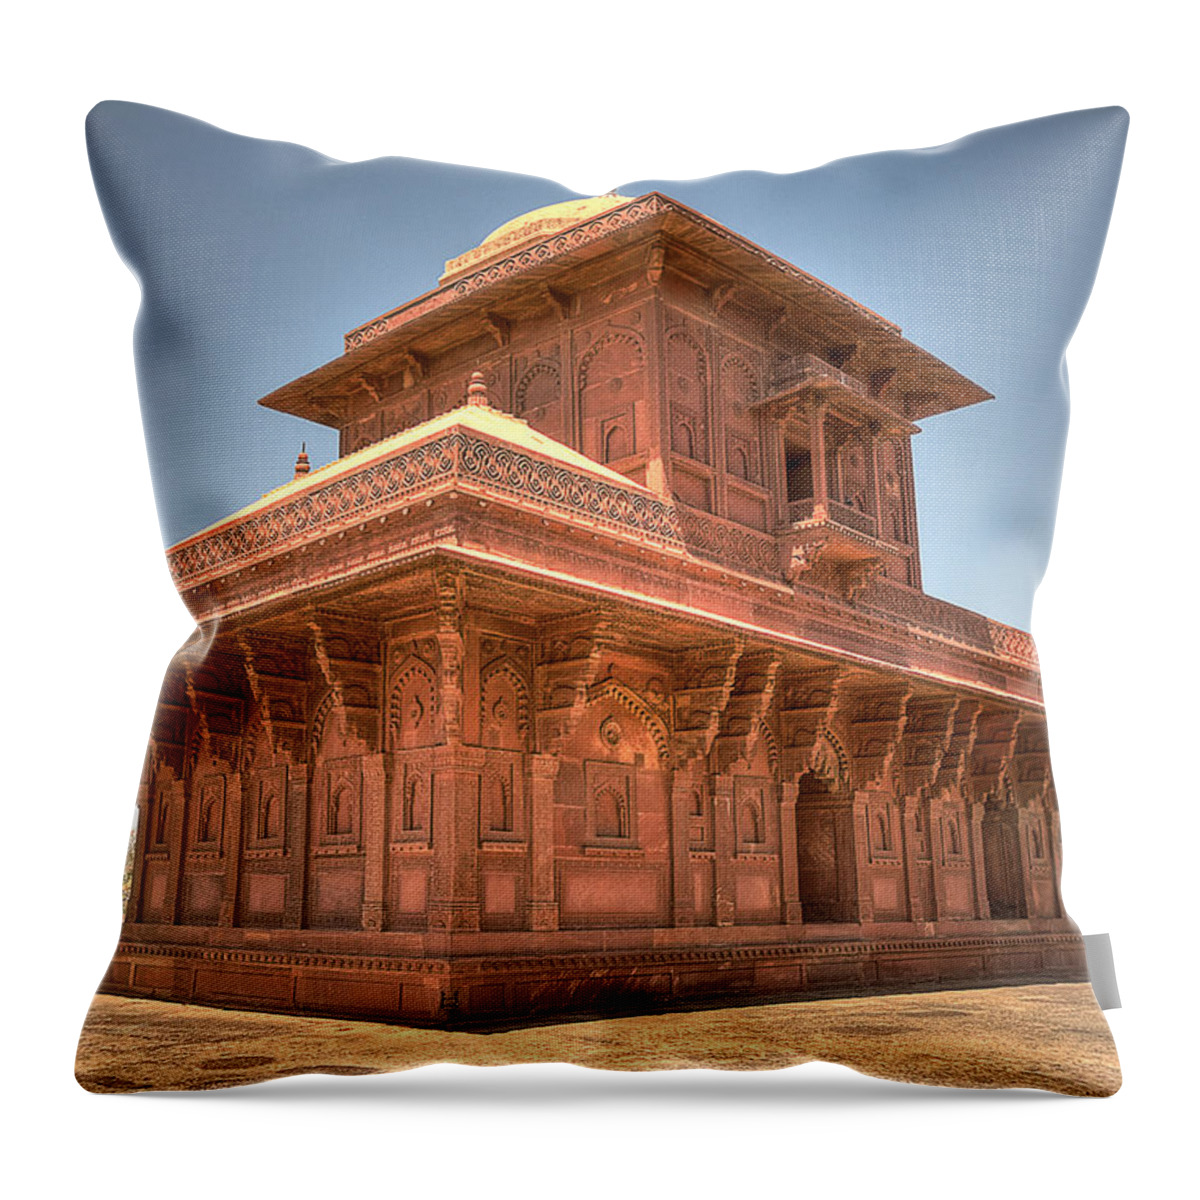 Arch Throw Pillow featuring the photograph Birbals House, Fatehpur Sikri by Mukul Banerjee Photography